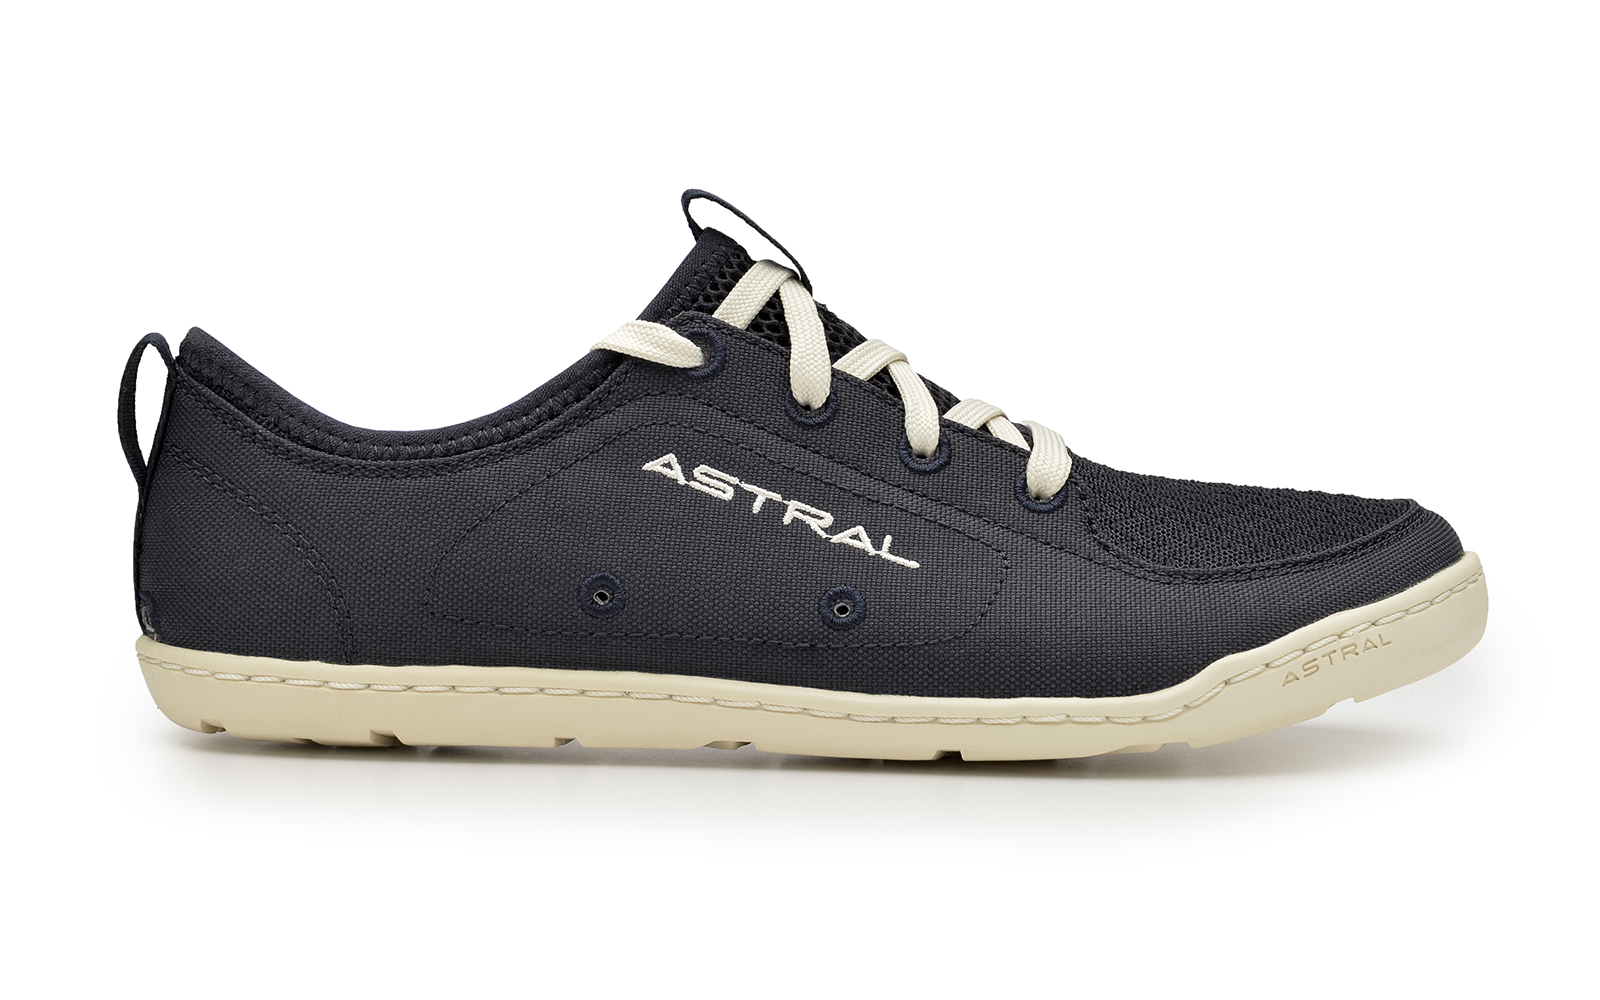 women's astral loyak water shoes